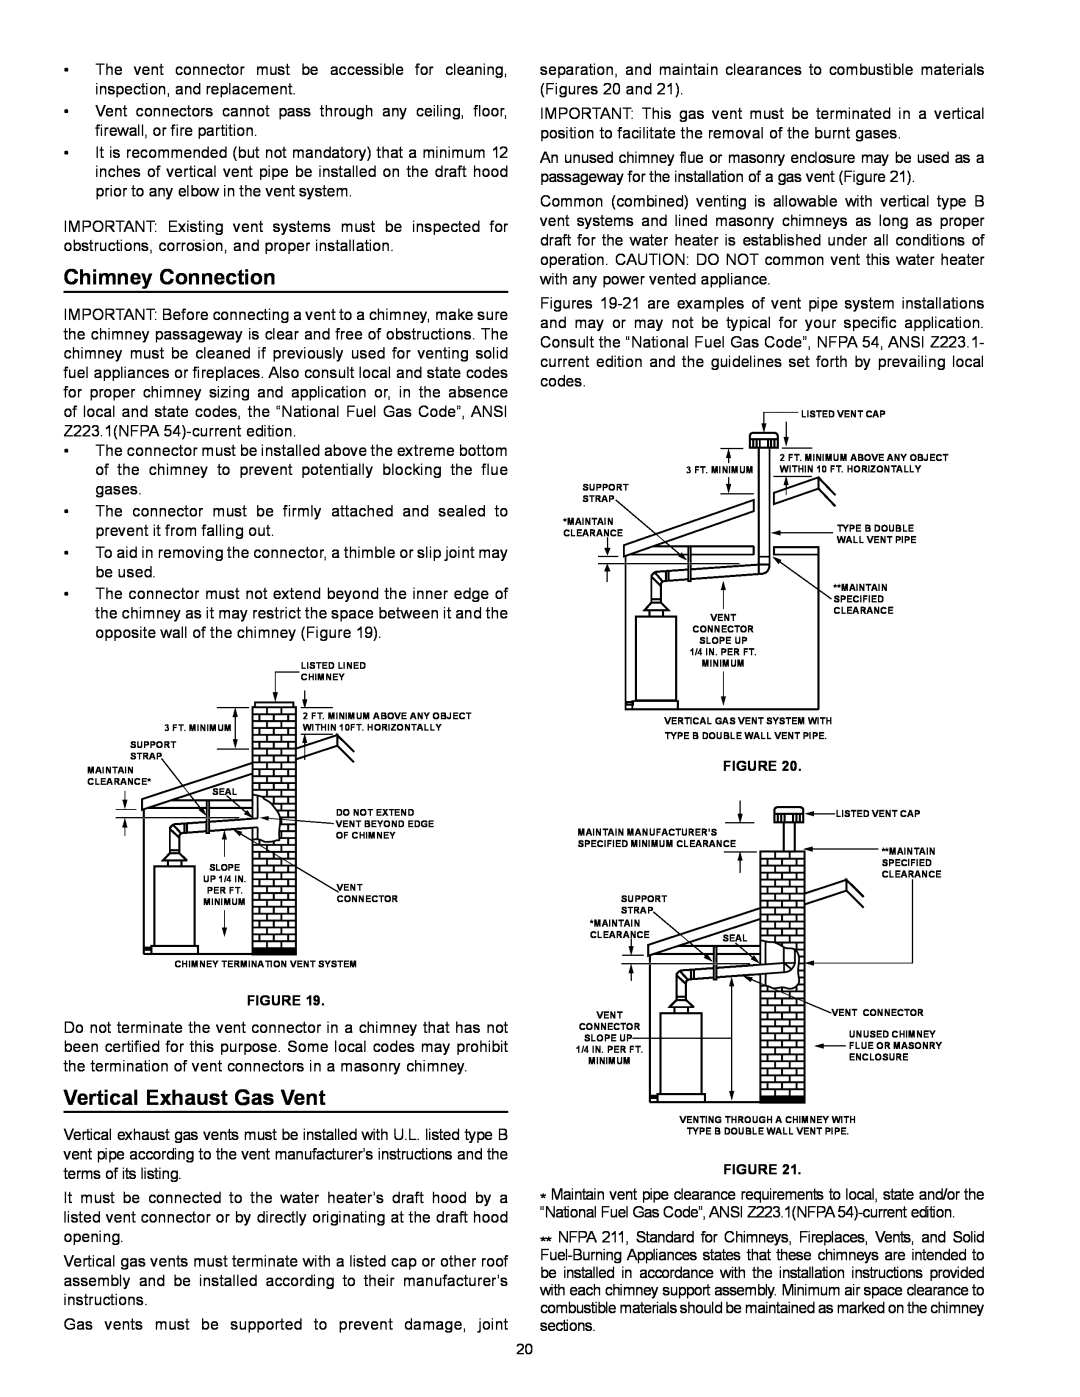 Kenmore 153.332.410 manual Chimney Connection, Vertical Exhaust Gas Vent 